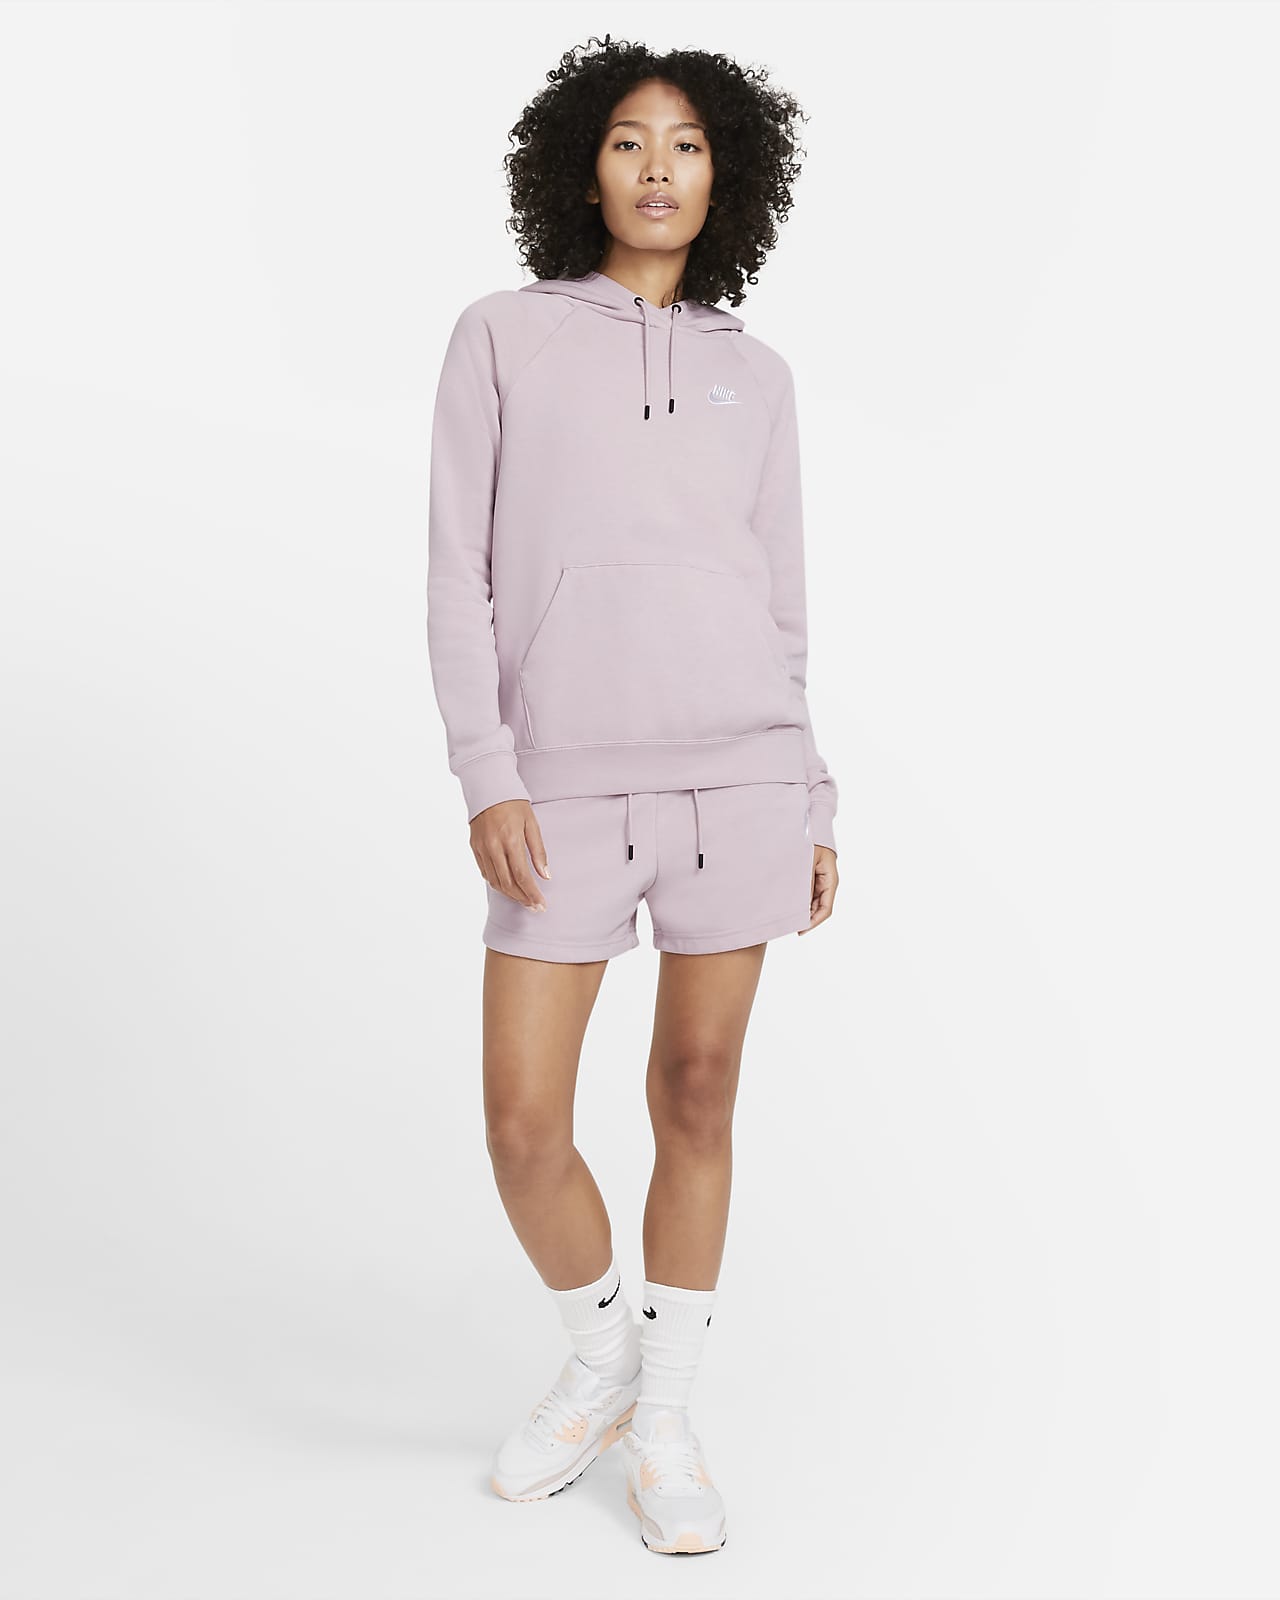 nike womens french terry shorts